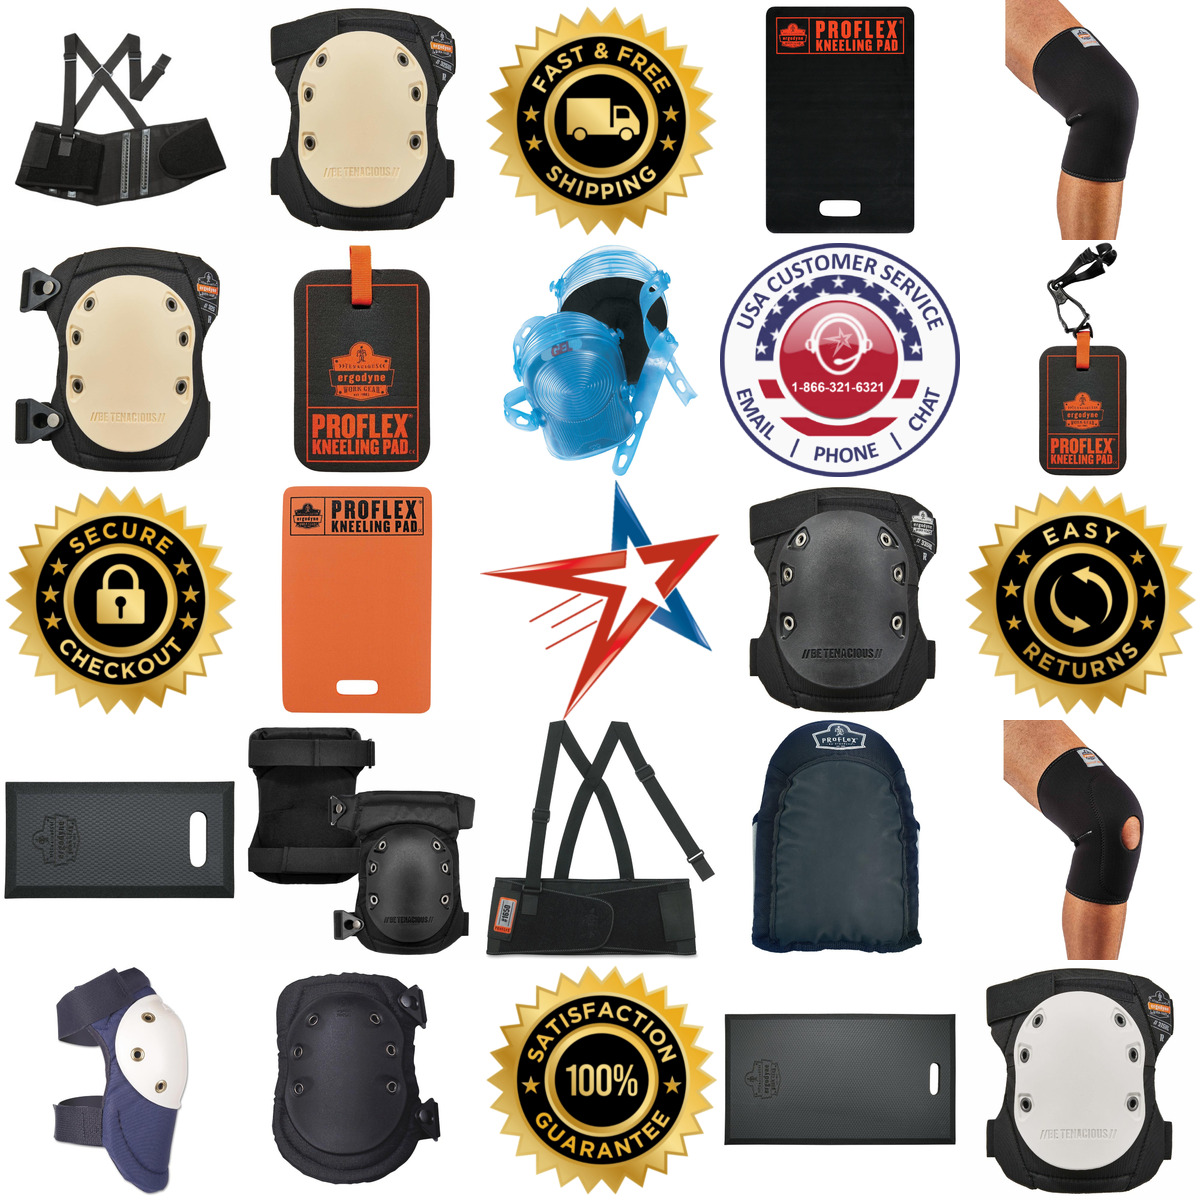 A selection of Ergonomic Protection products on GoVets